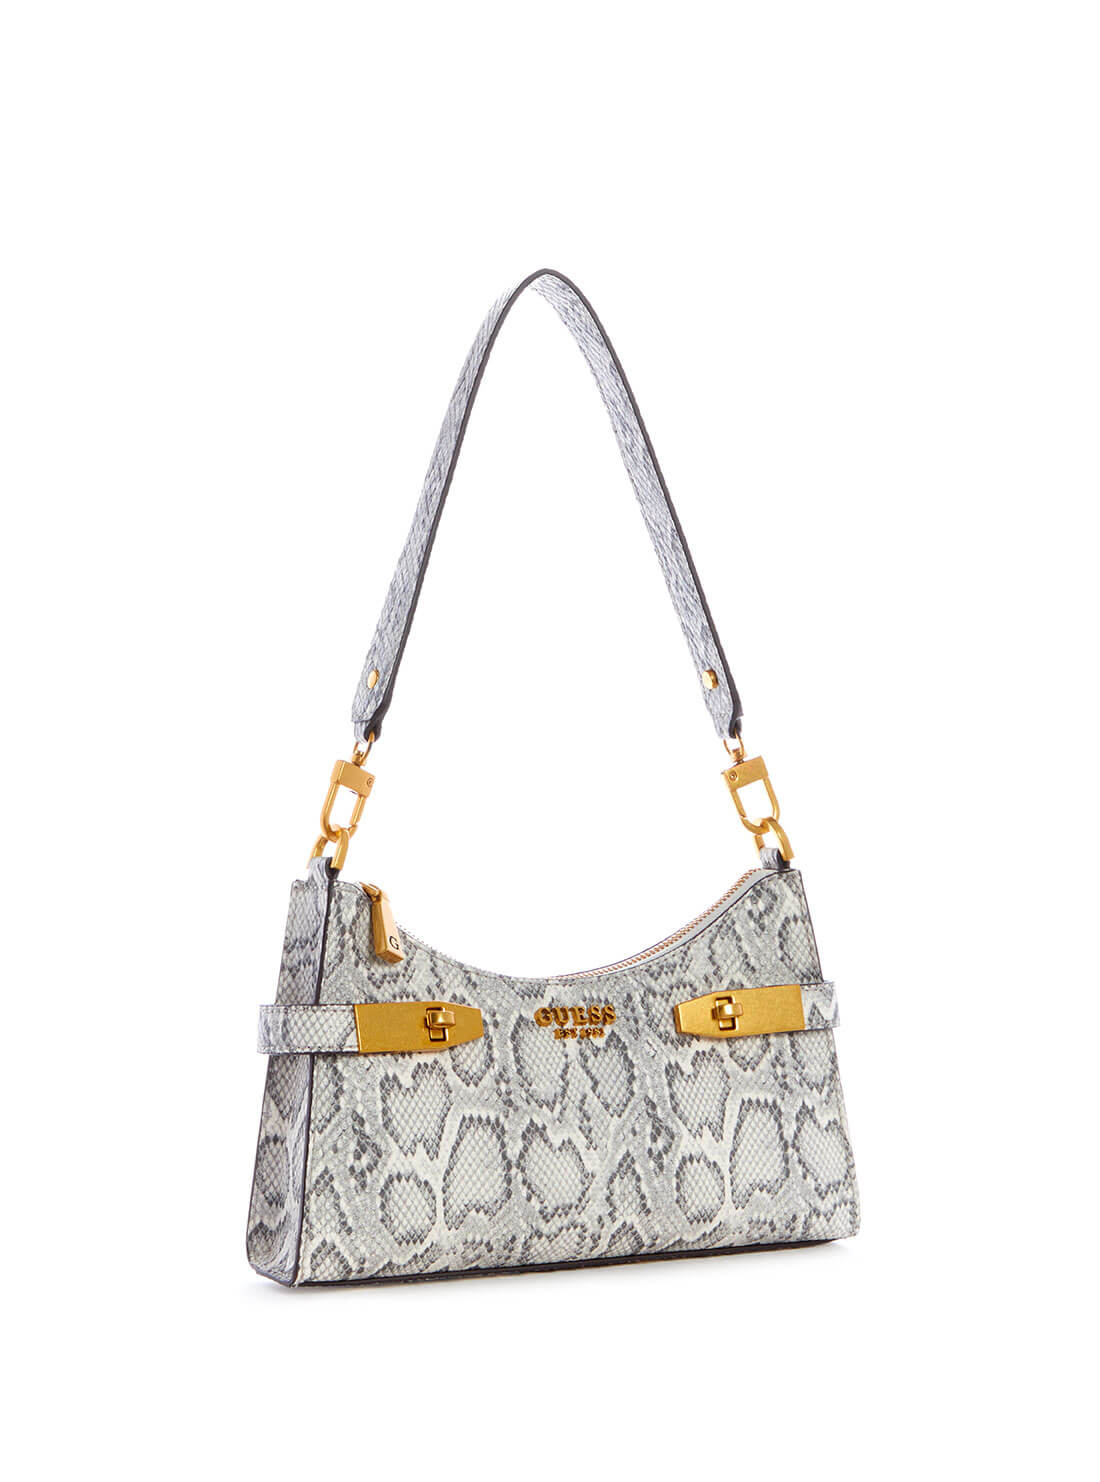 GUESS Womens Python Zadie Shoulder Bag Side View